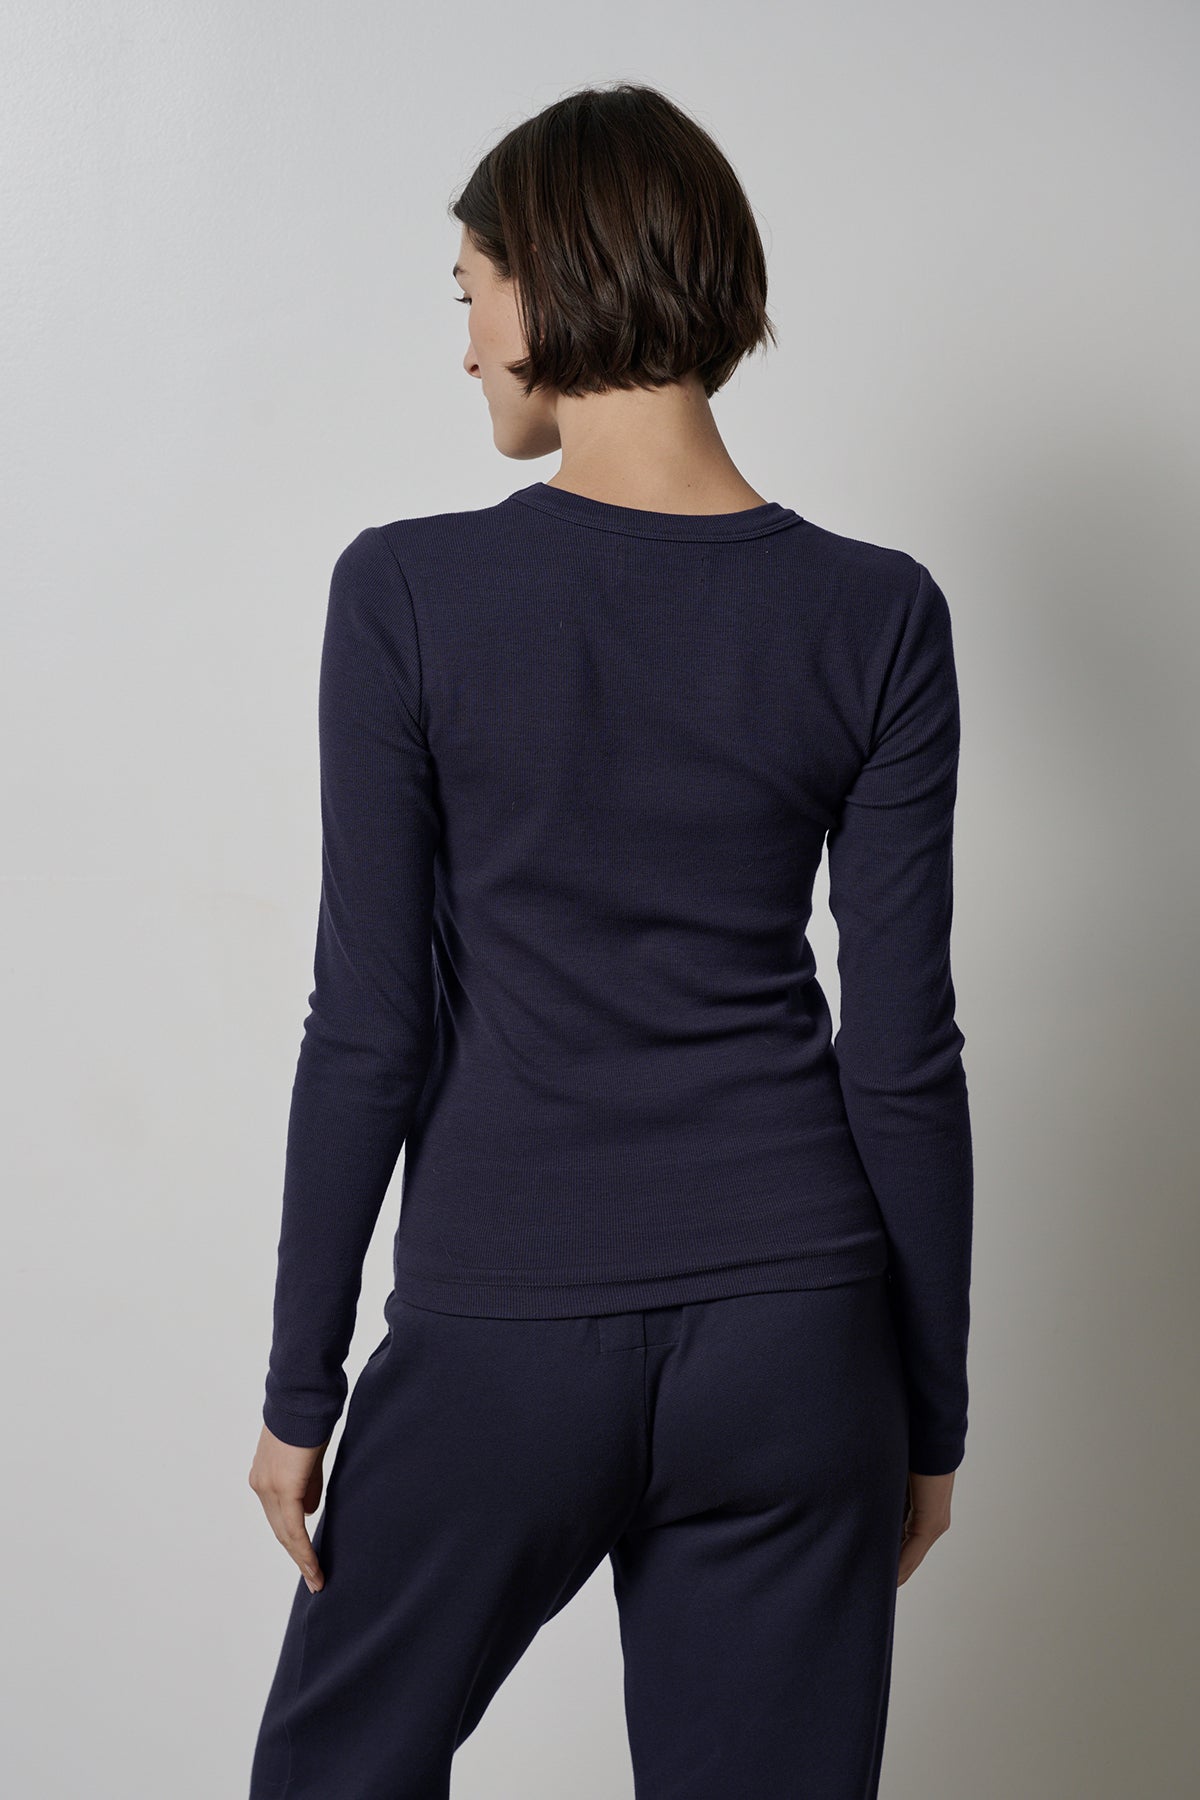 The back view of a woman wearing a Velvet by Jenny Graham CAMINO TEE and pants, providing ultimate comfort with a slimmer fit.-35547425833153